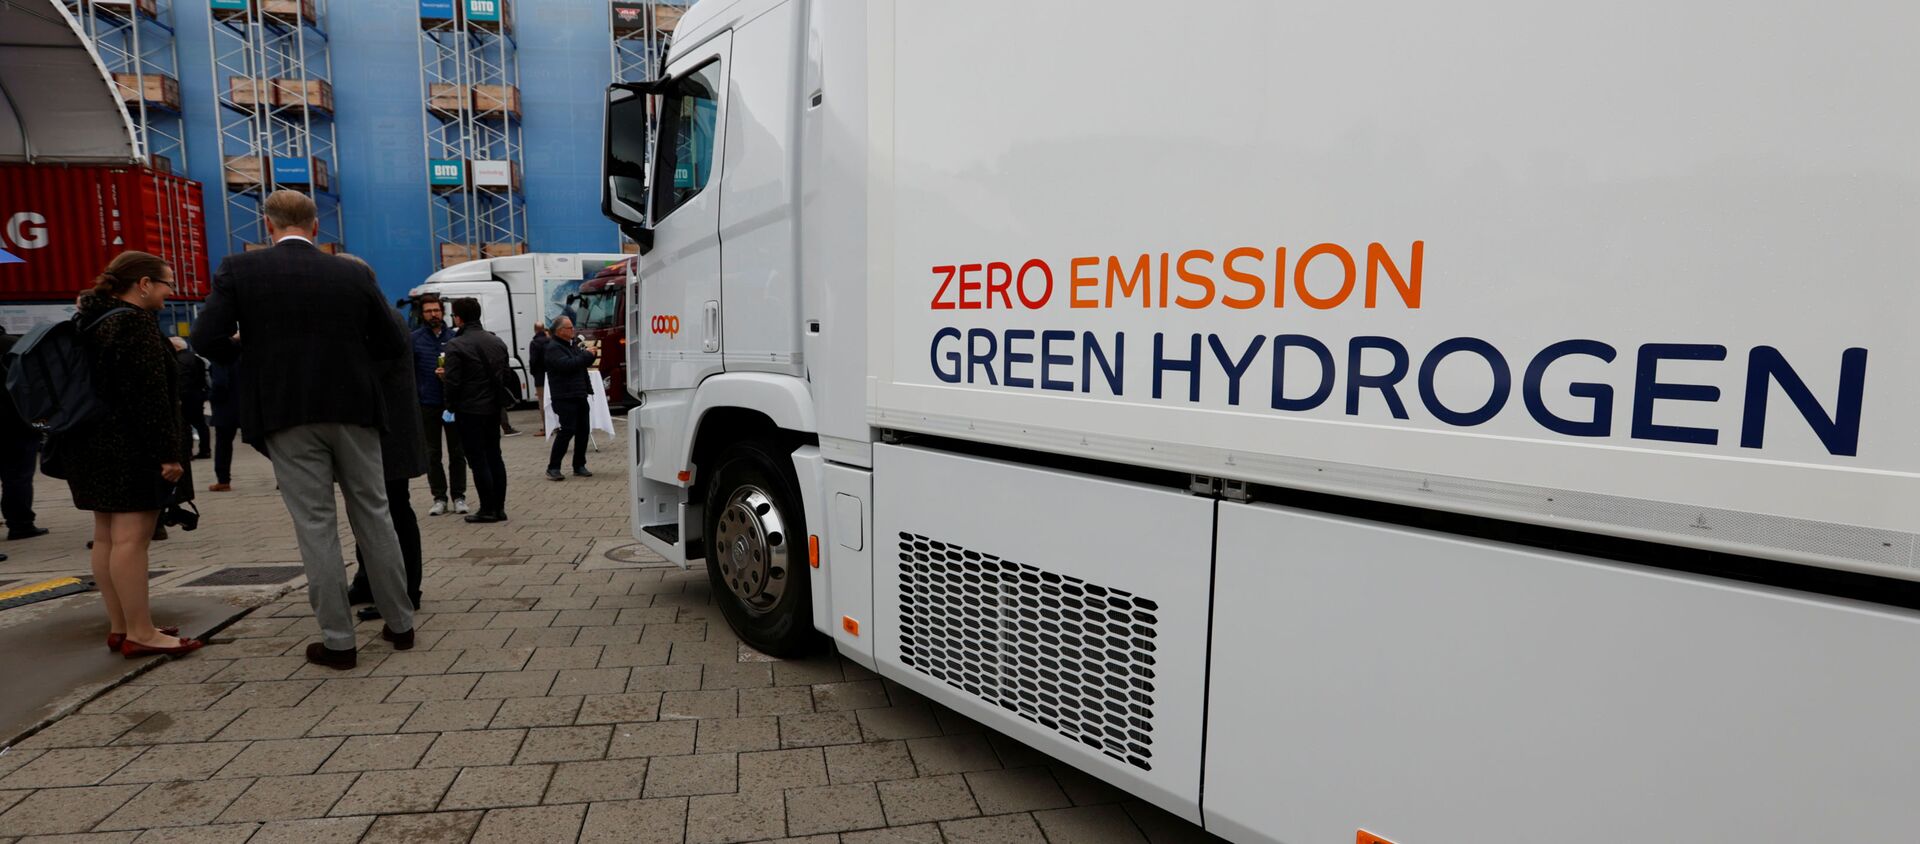 A new hydrogen fuel cell truck made by Hyundai is pictured ahead of a media presentation for the zero-emission transport of goods at the Verkehrshaus Luzern (Swiss Museum of Transport) in Luzern, Switzerland, 7 October 2020 - Sputnik International, 1920, 29.10.2020